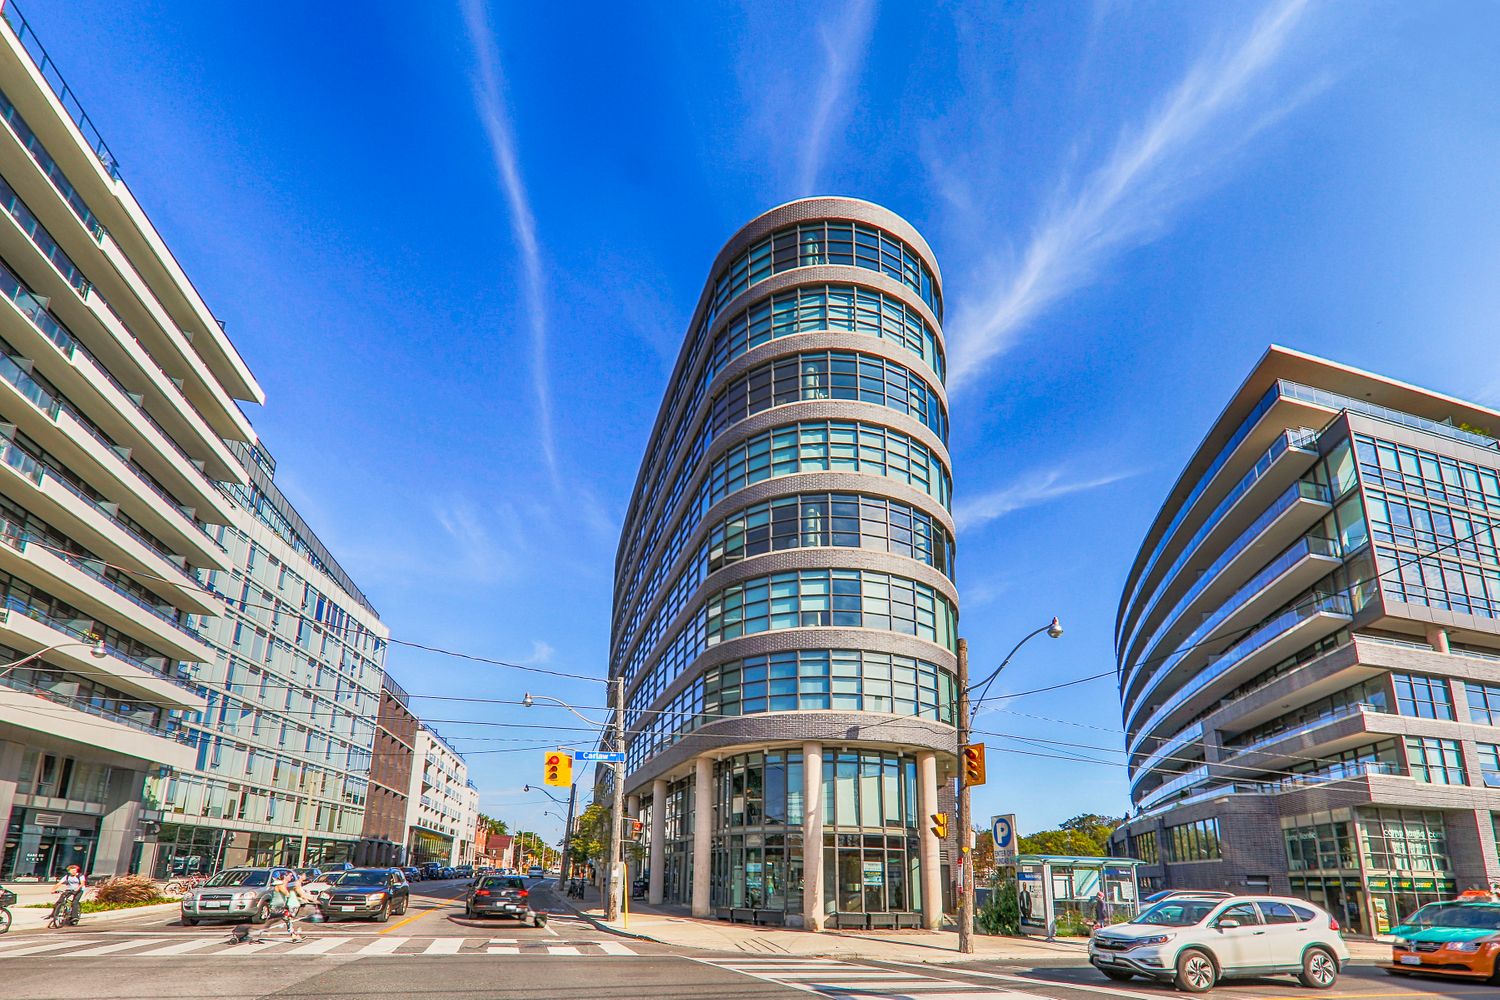 1201 Dundas Street E. Flatiron Lofts is located in  East End, Toronto - image #1 of 4